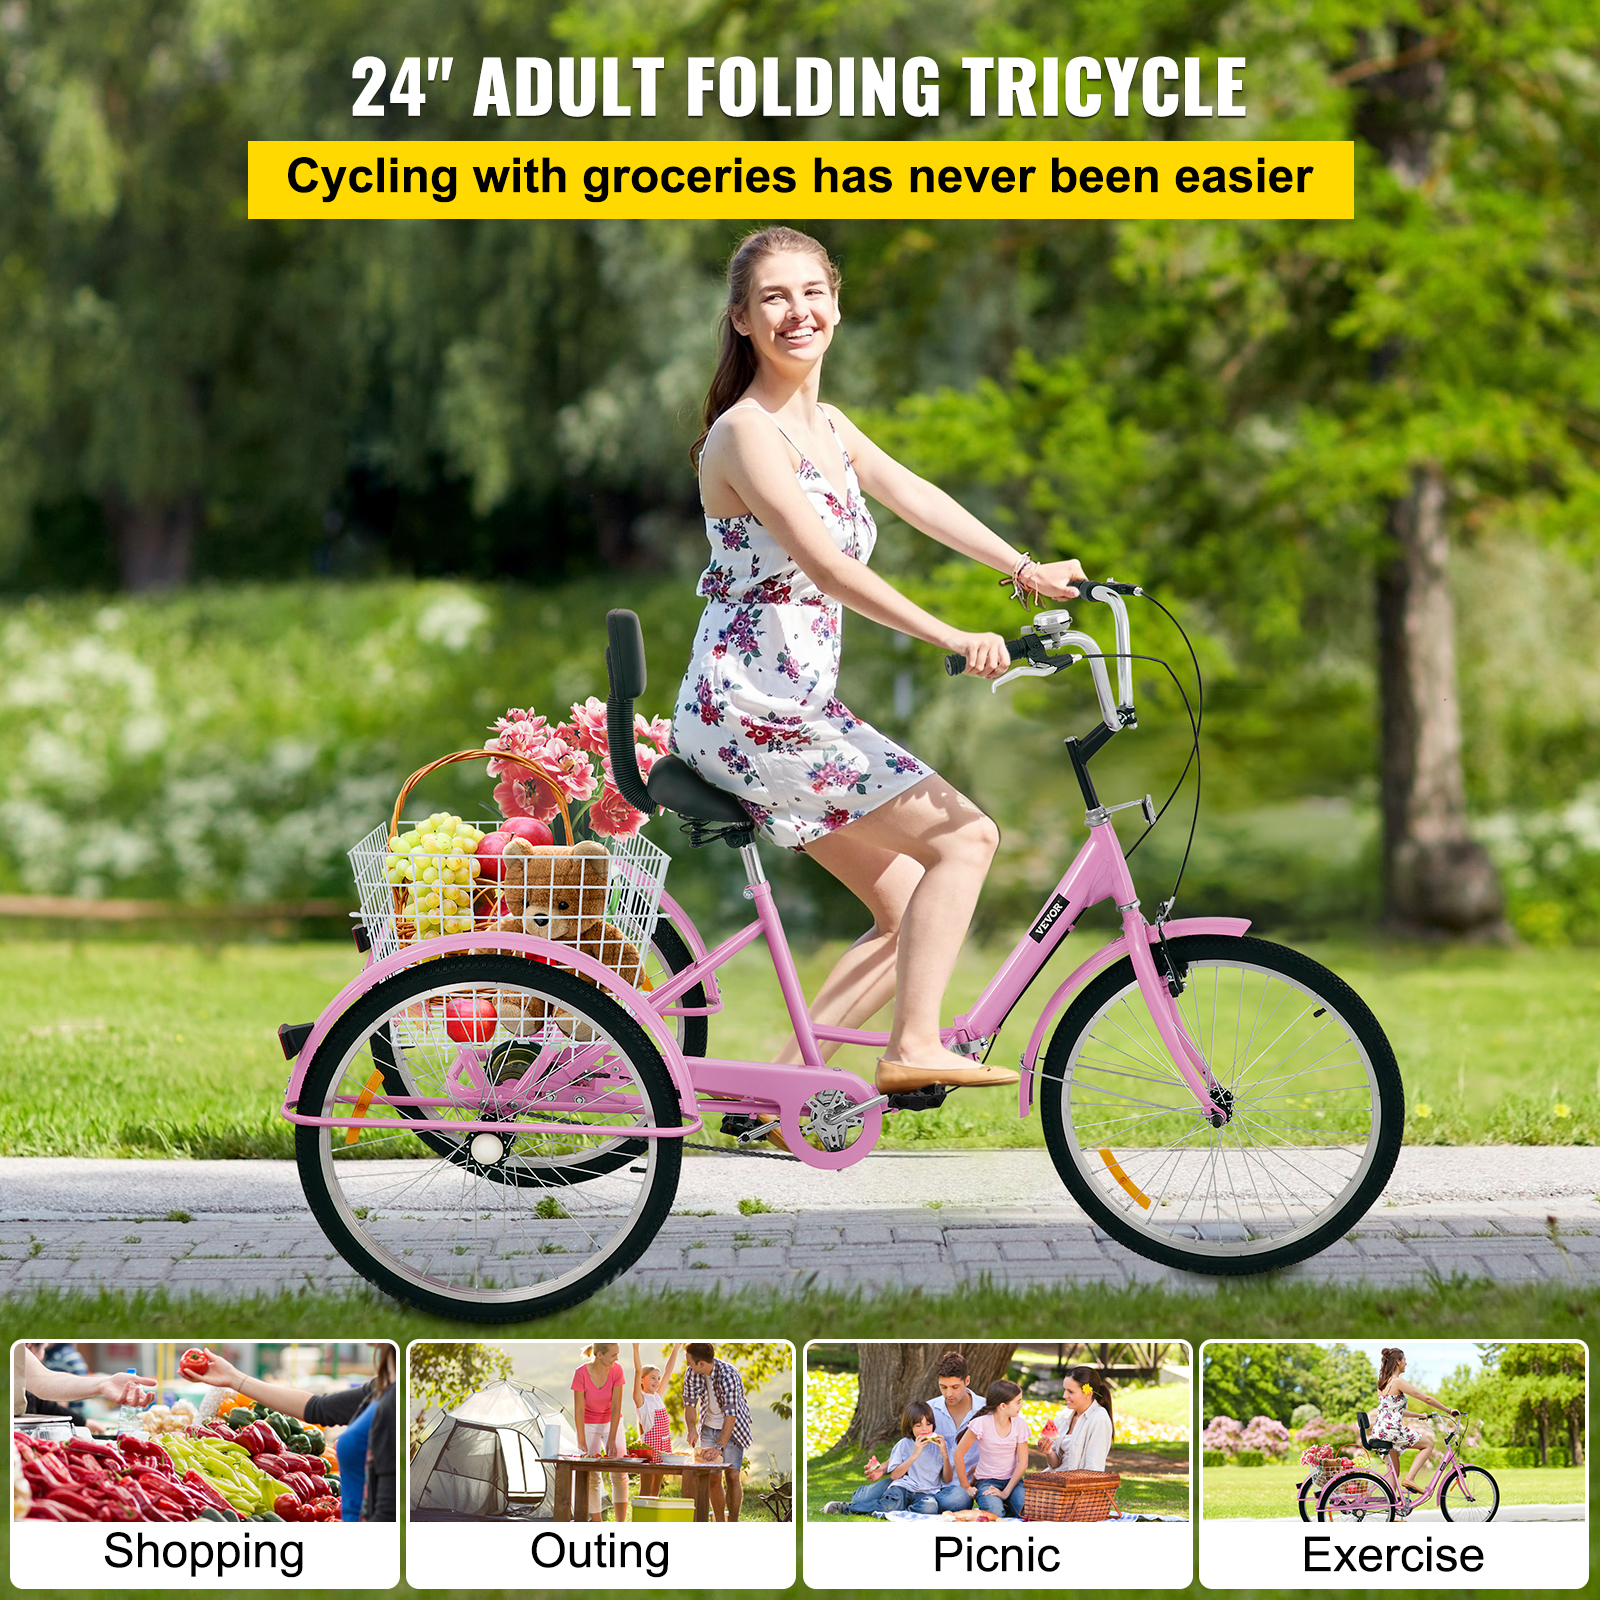 VEVOR Foldable Adult Tricycle 24 Wheels, 1-Speed Pink Trike, 3 Wheels Colorful Bike with Basket, Portable and Foldable Bicycle for Adults Exercise Shopping Picnic Outdoor Activities - image 3 of 9